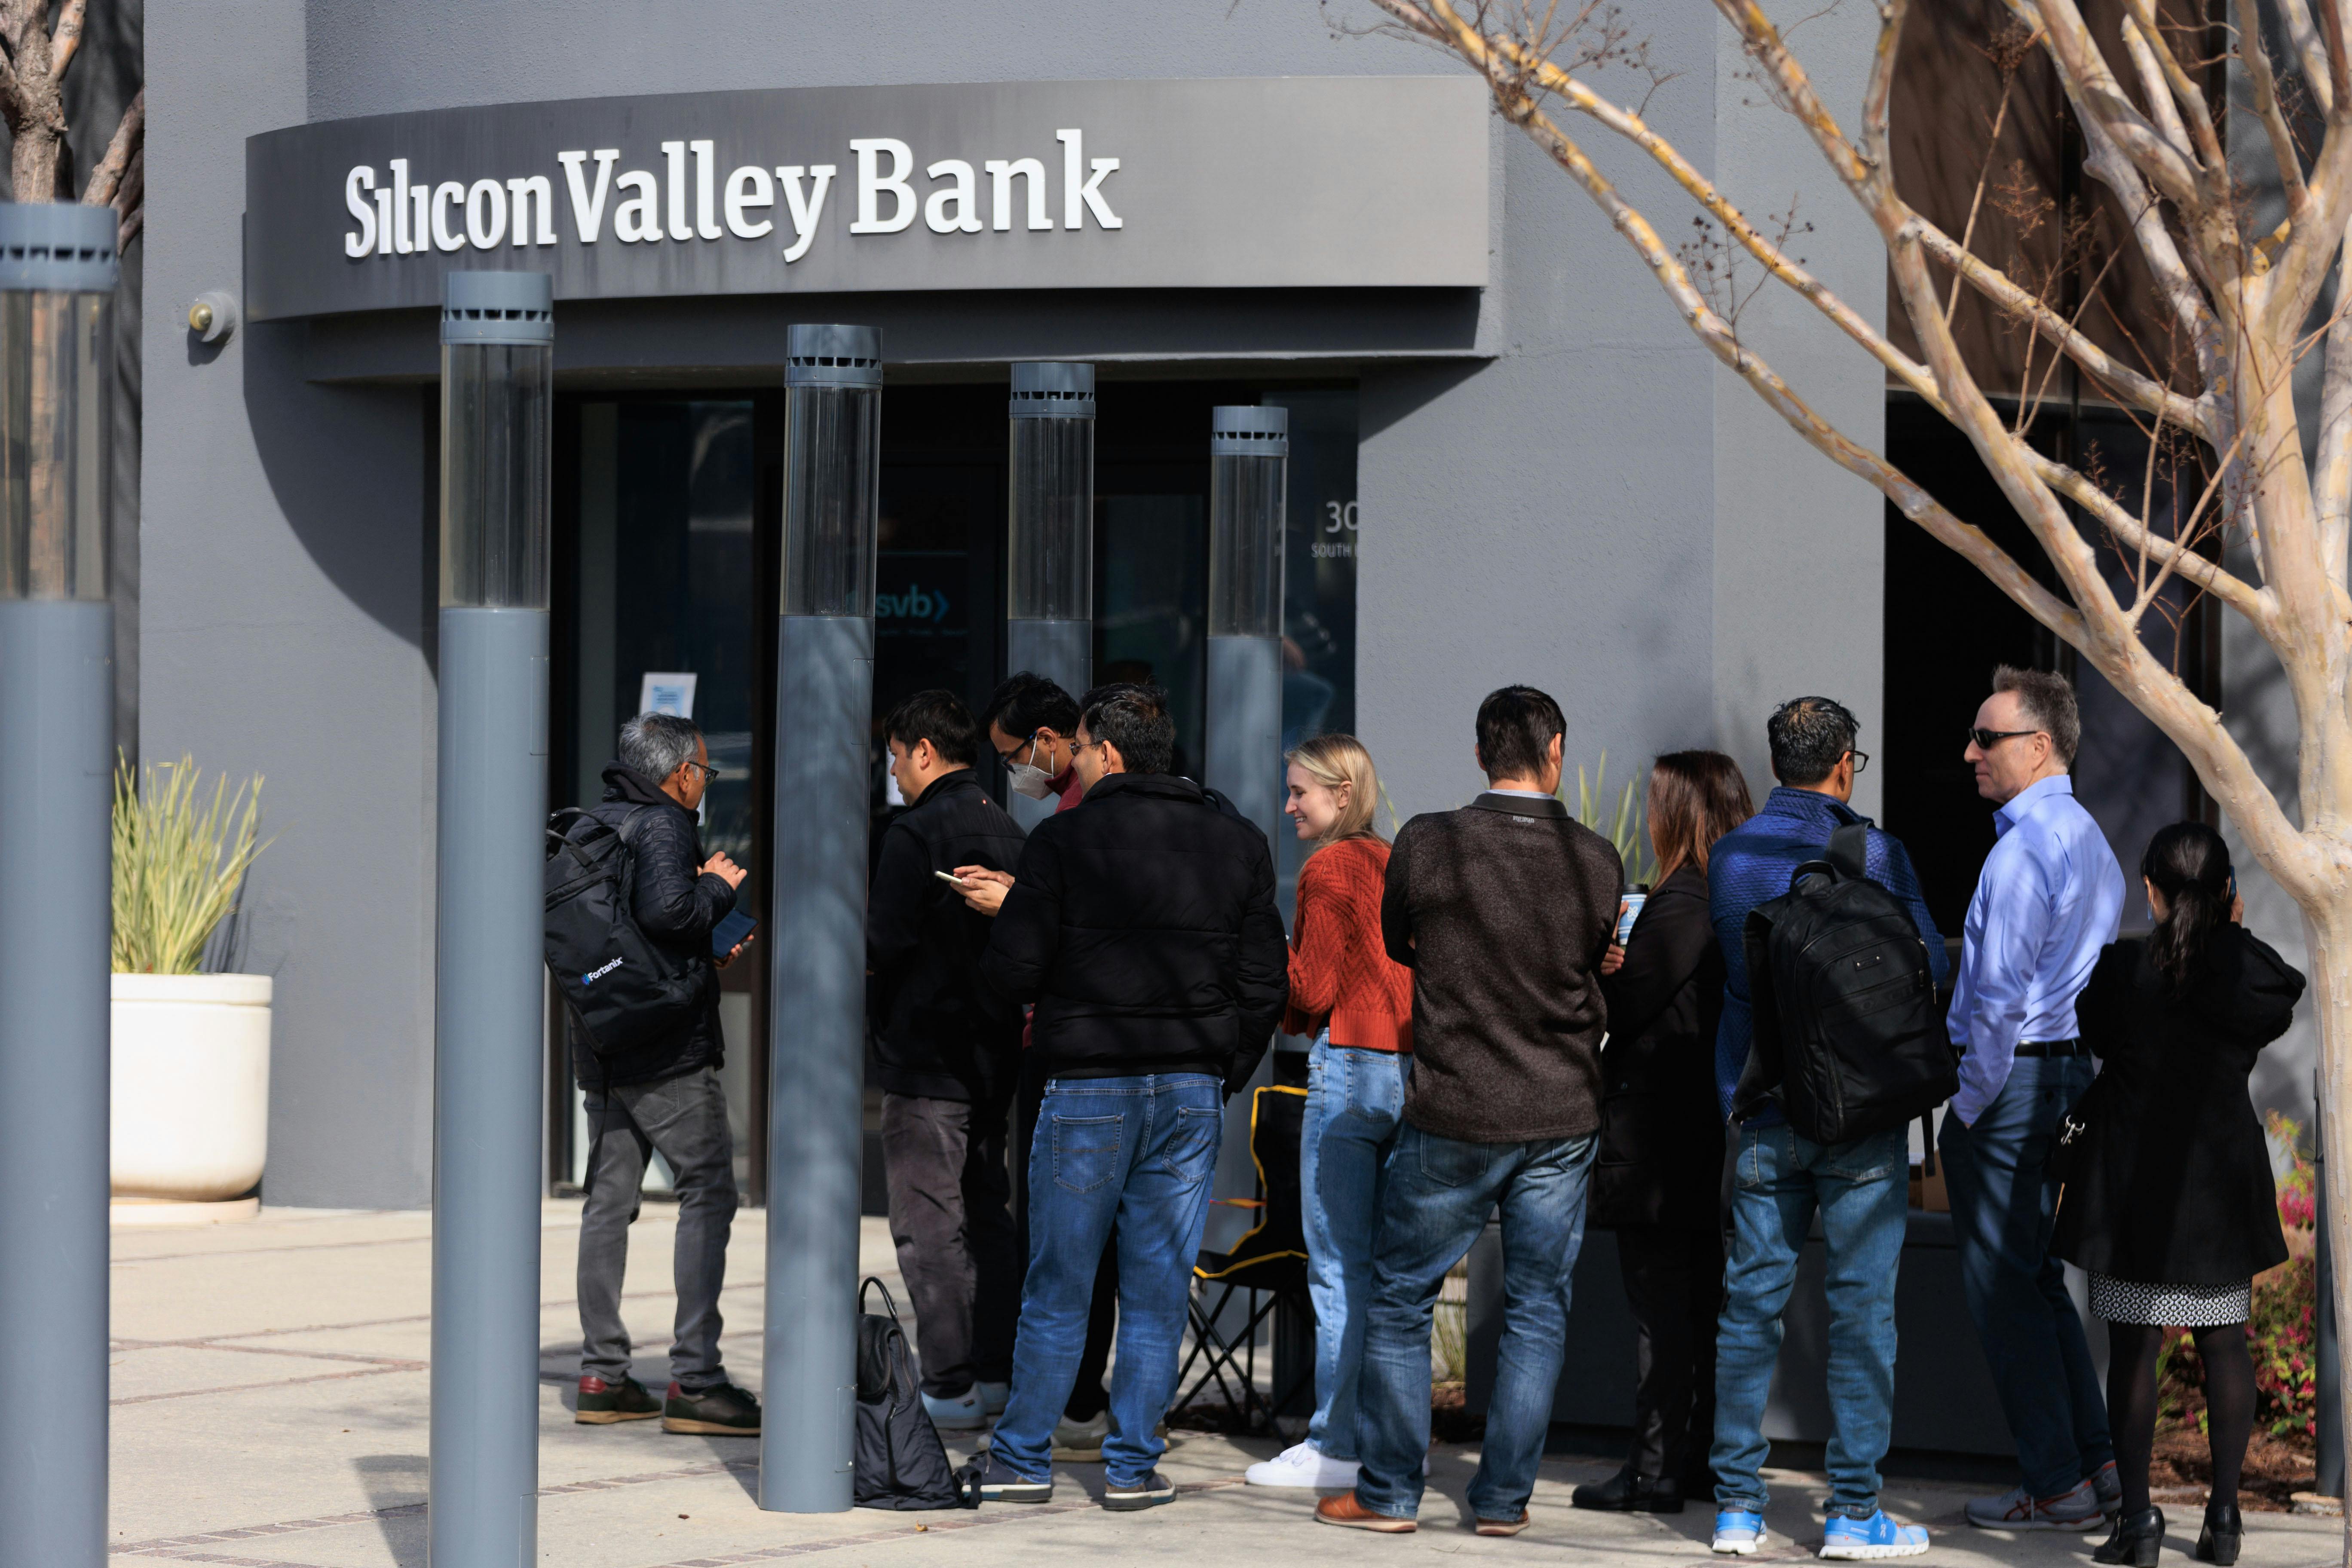 Watch: Massive line forms outside Silicon Valley Bank as customers